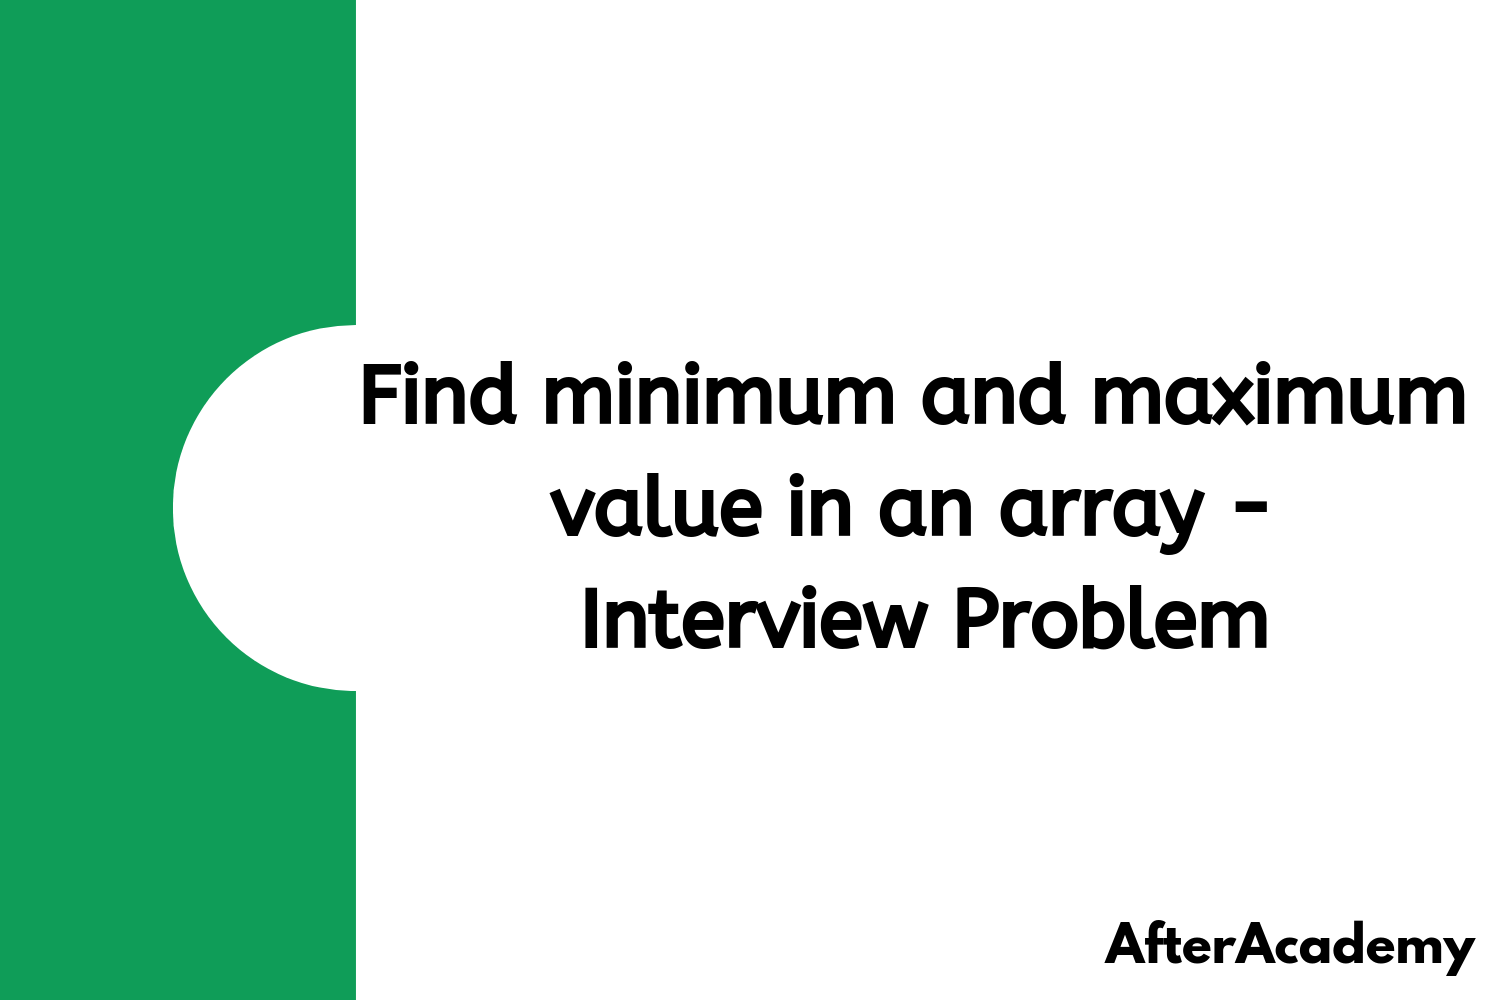 Find minimum and maximum value in an array - Interview Problem